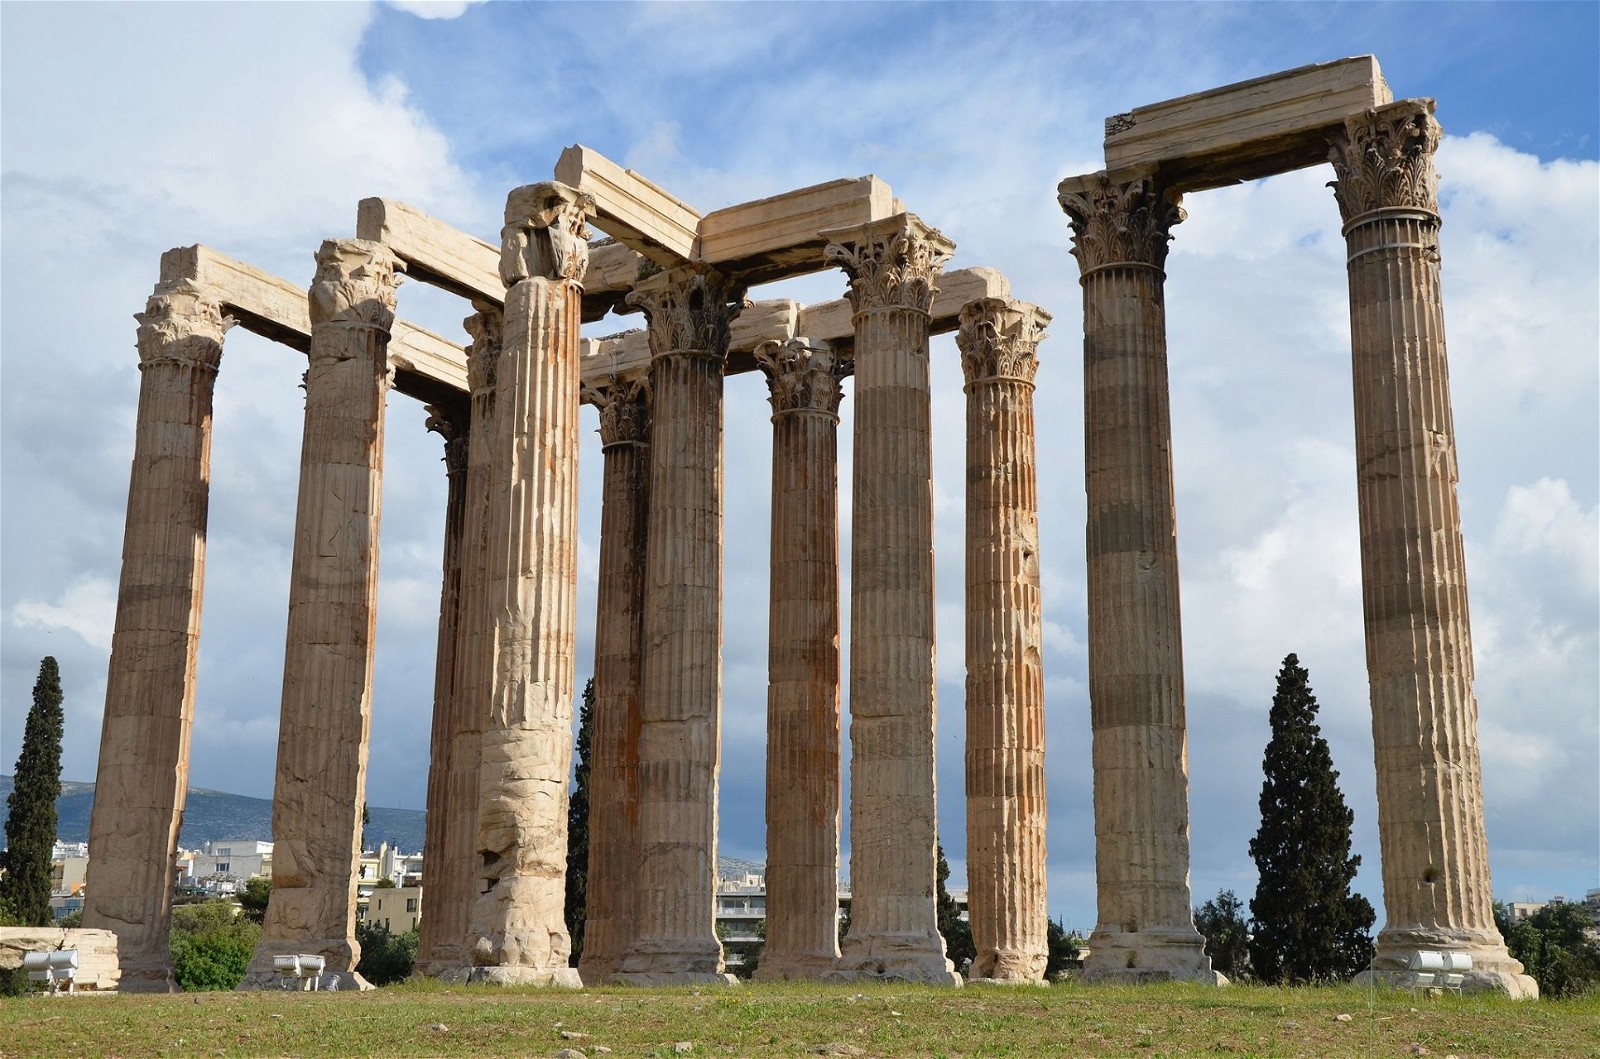  Temple of Olympian Zeus:  The Temple of Olympian Zeus is one of the most important temples in ancient Greece dedicated to Zeus, one of the most prominent gods in Greek mythology. 